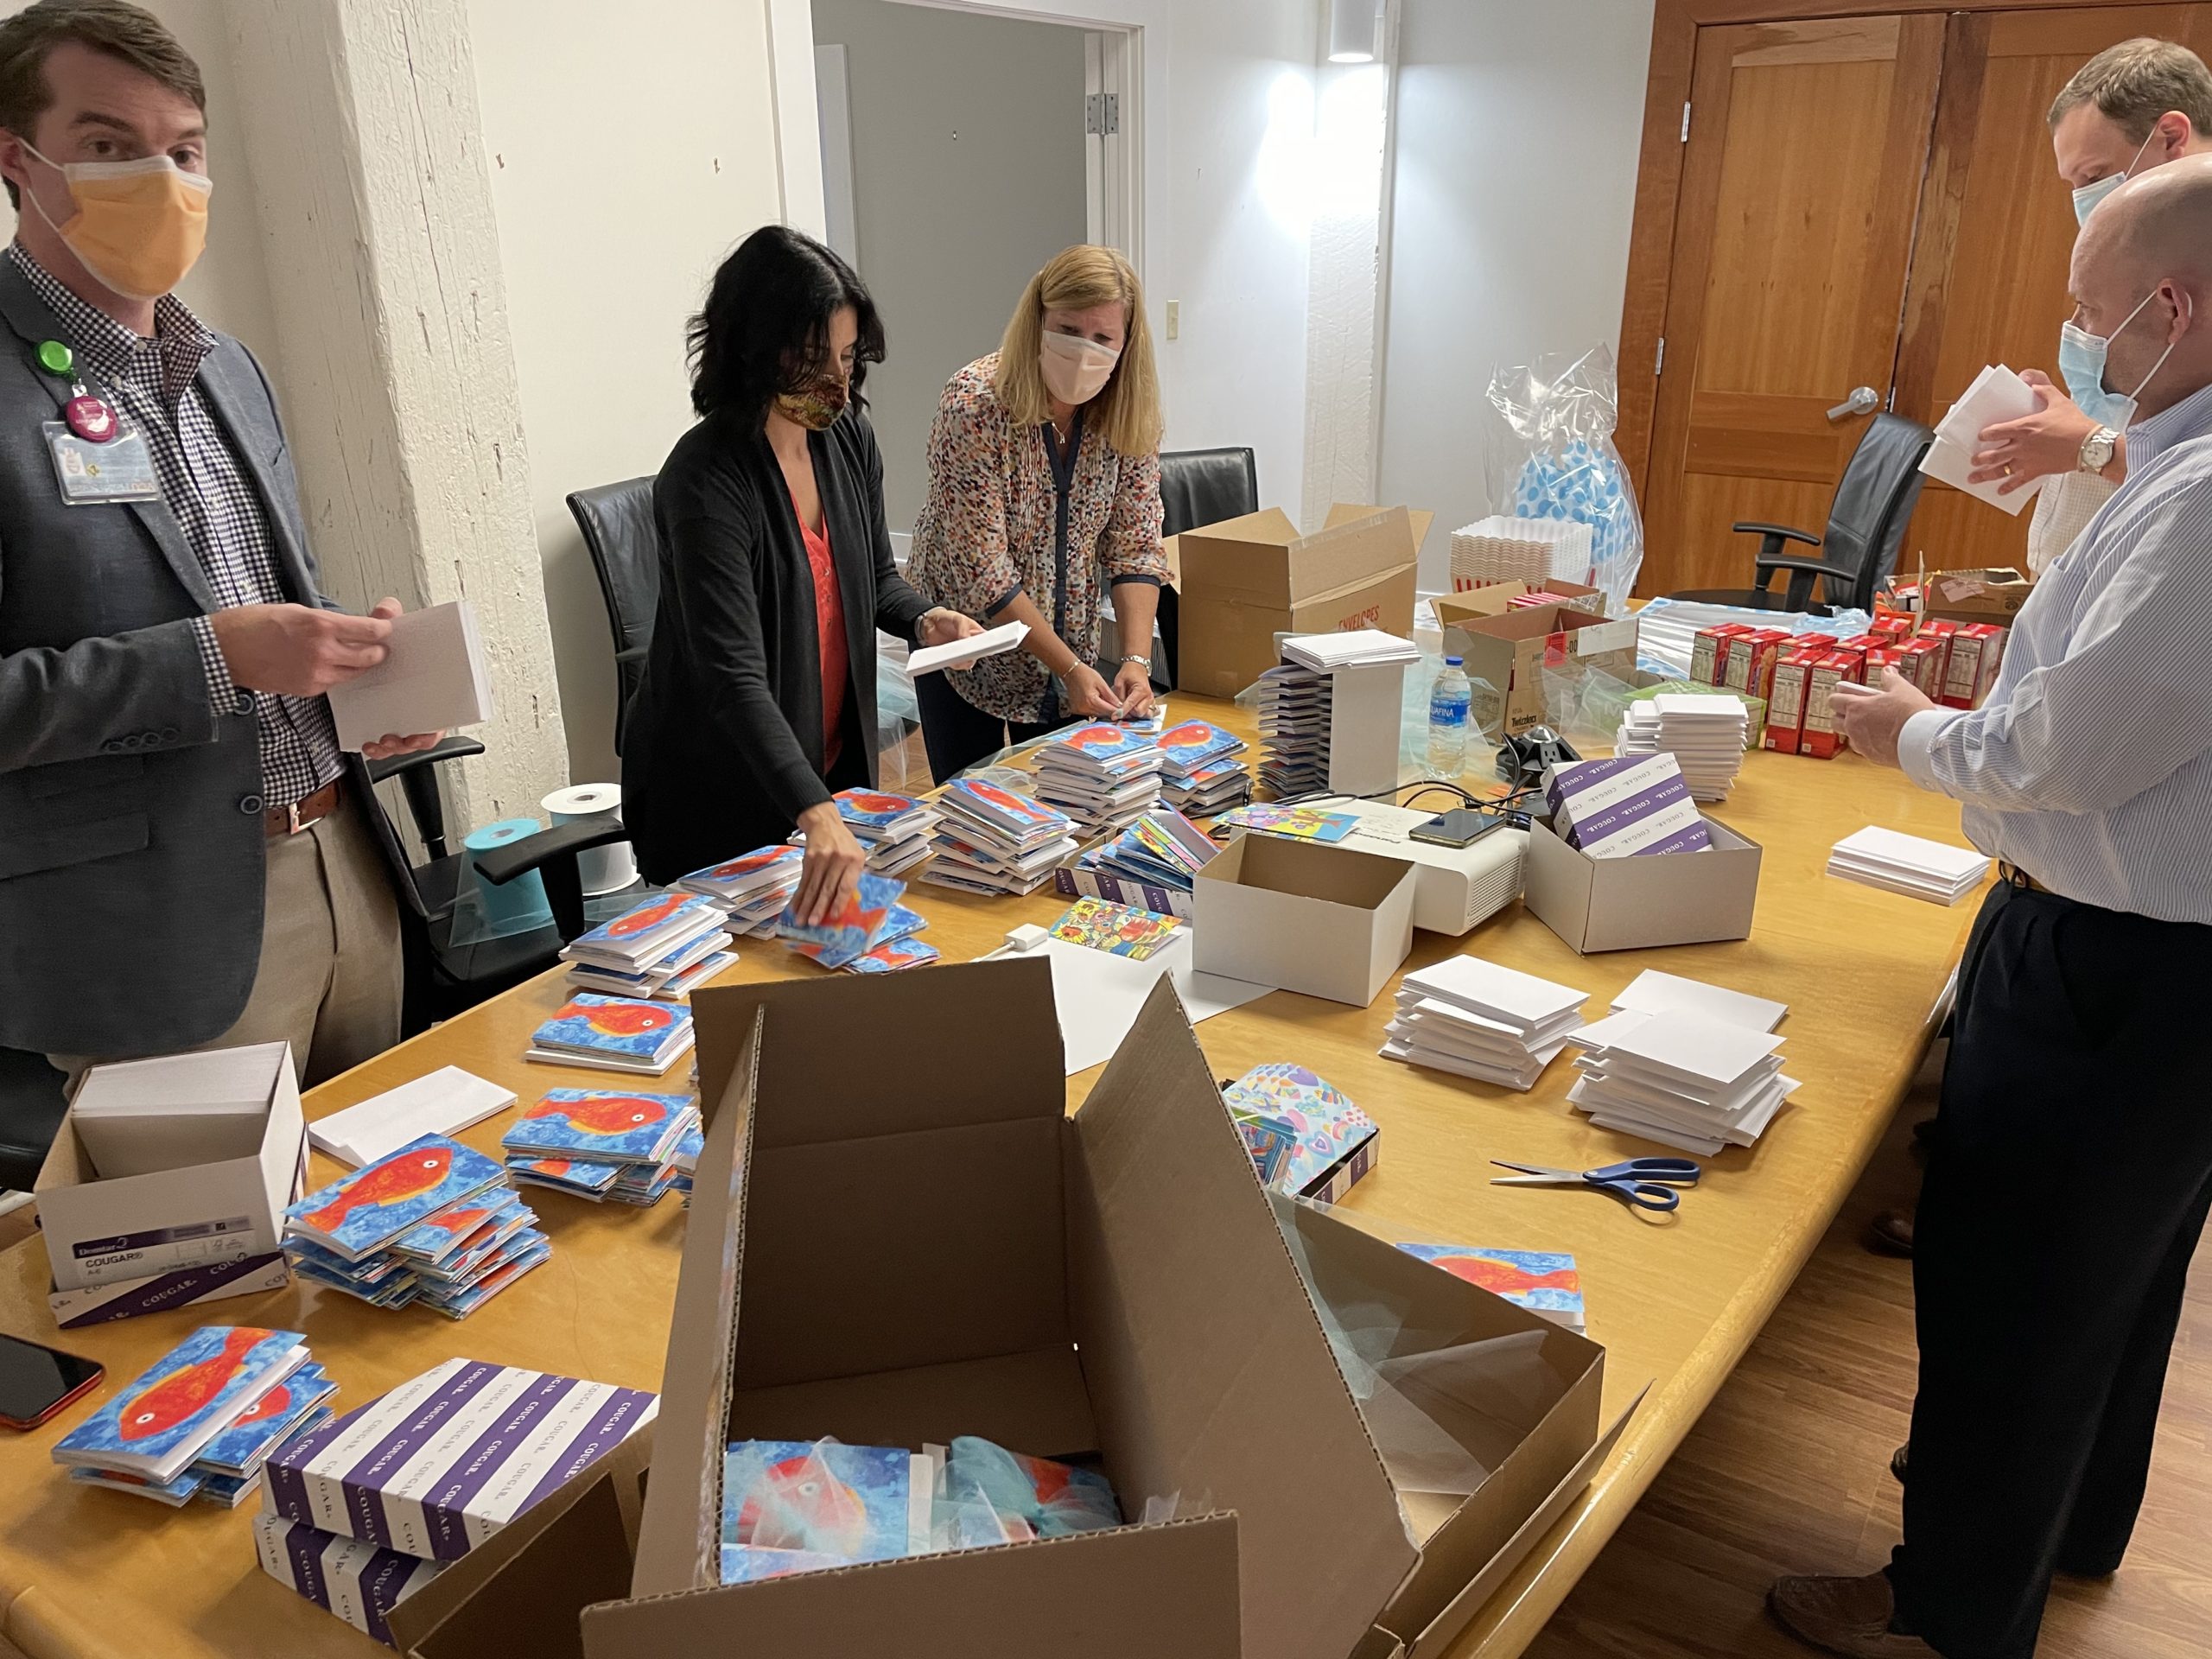 Image 5 people standing around a conference table. On the table are piles of greeting cards and boxes.